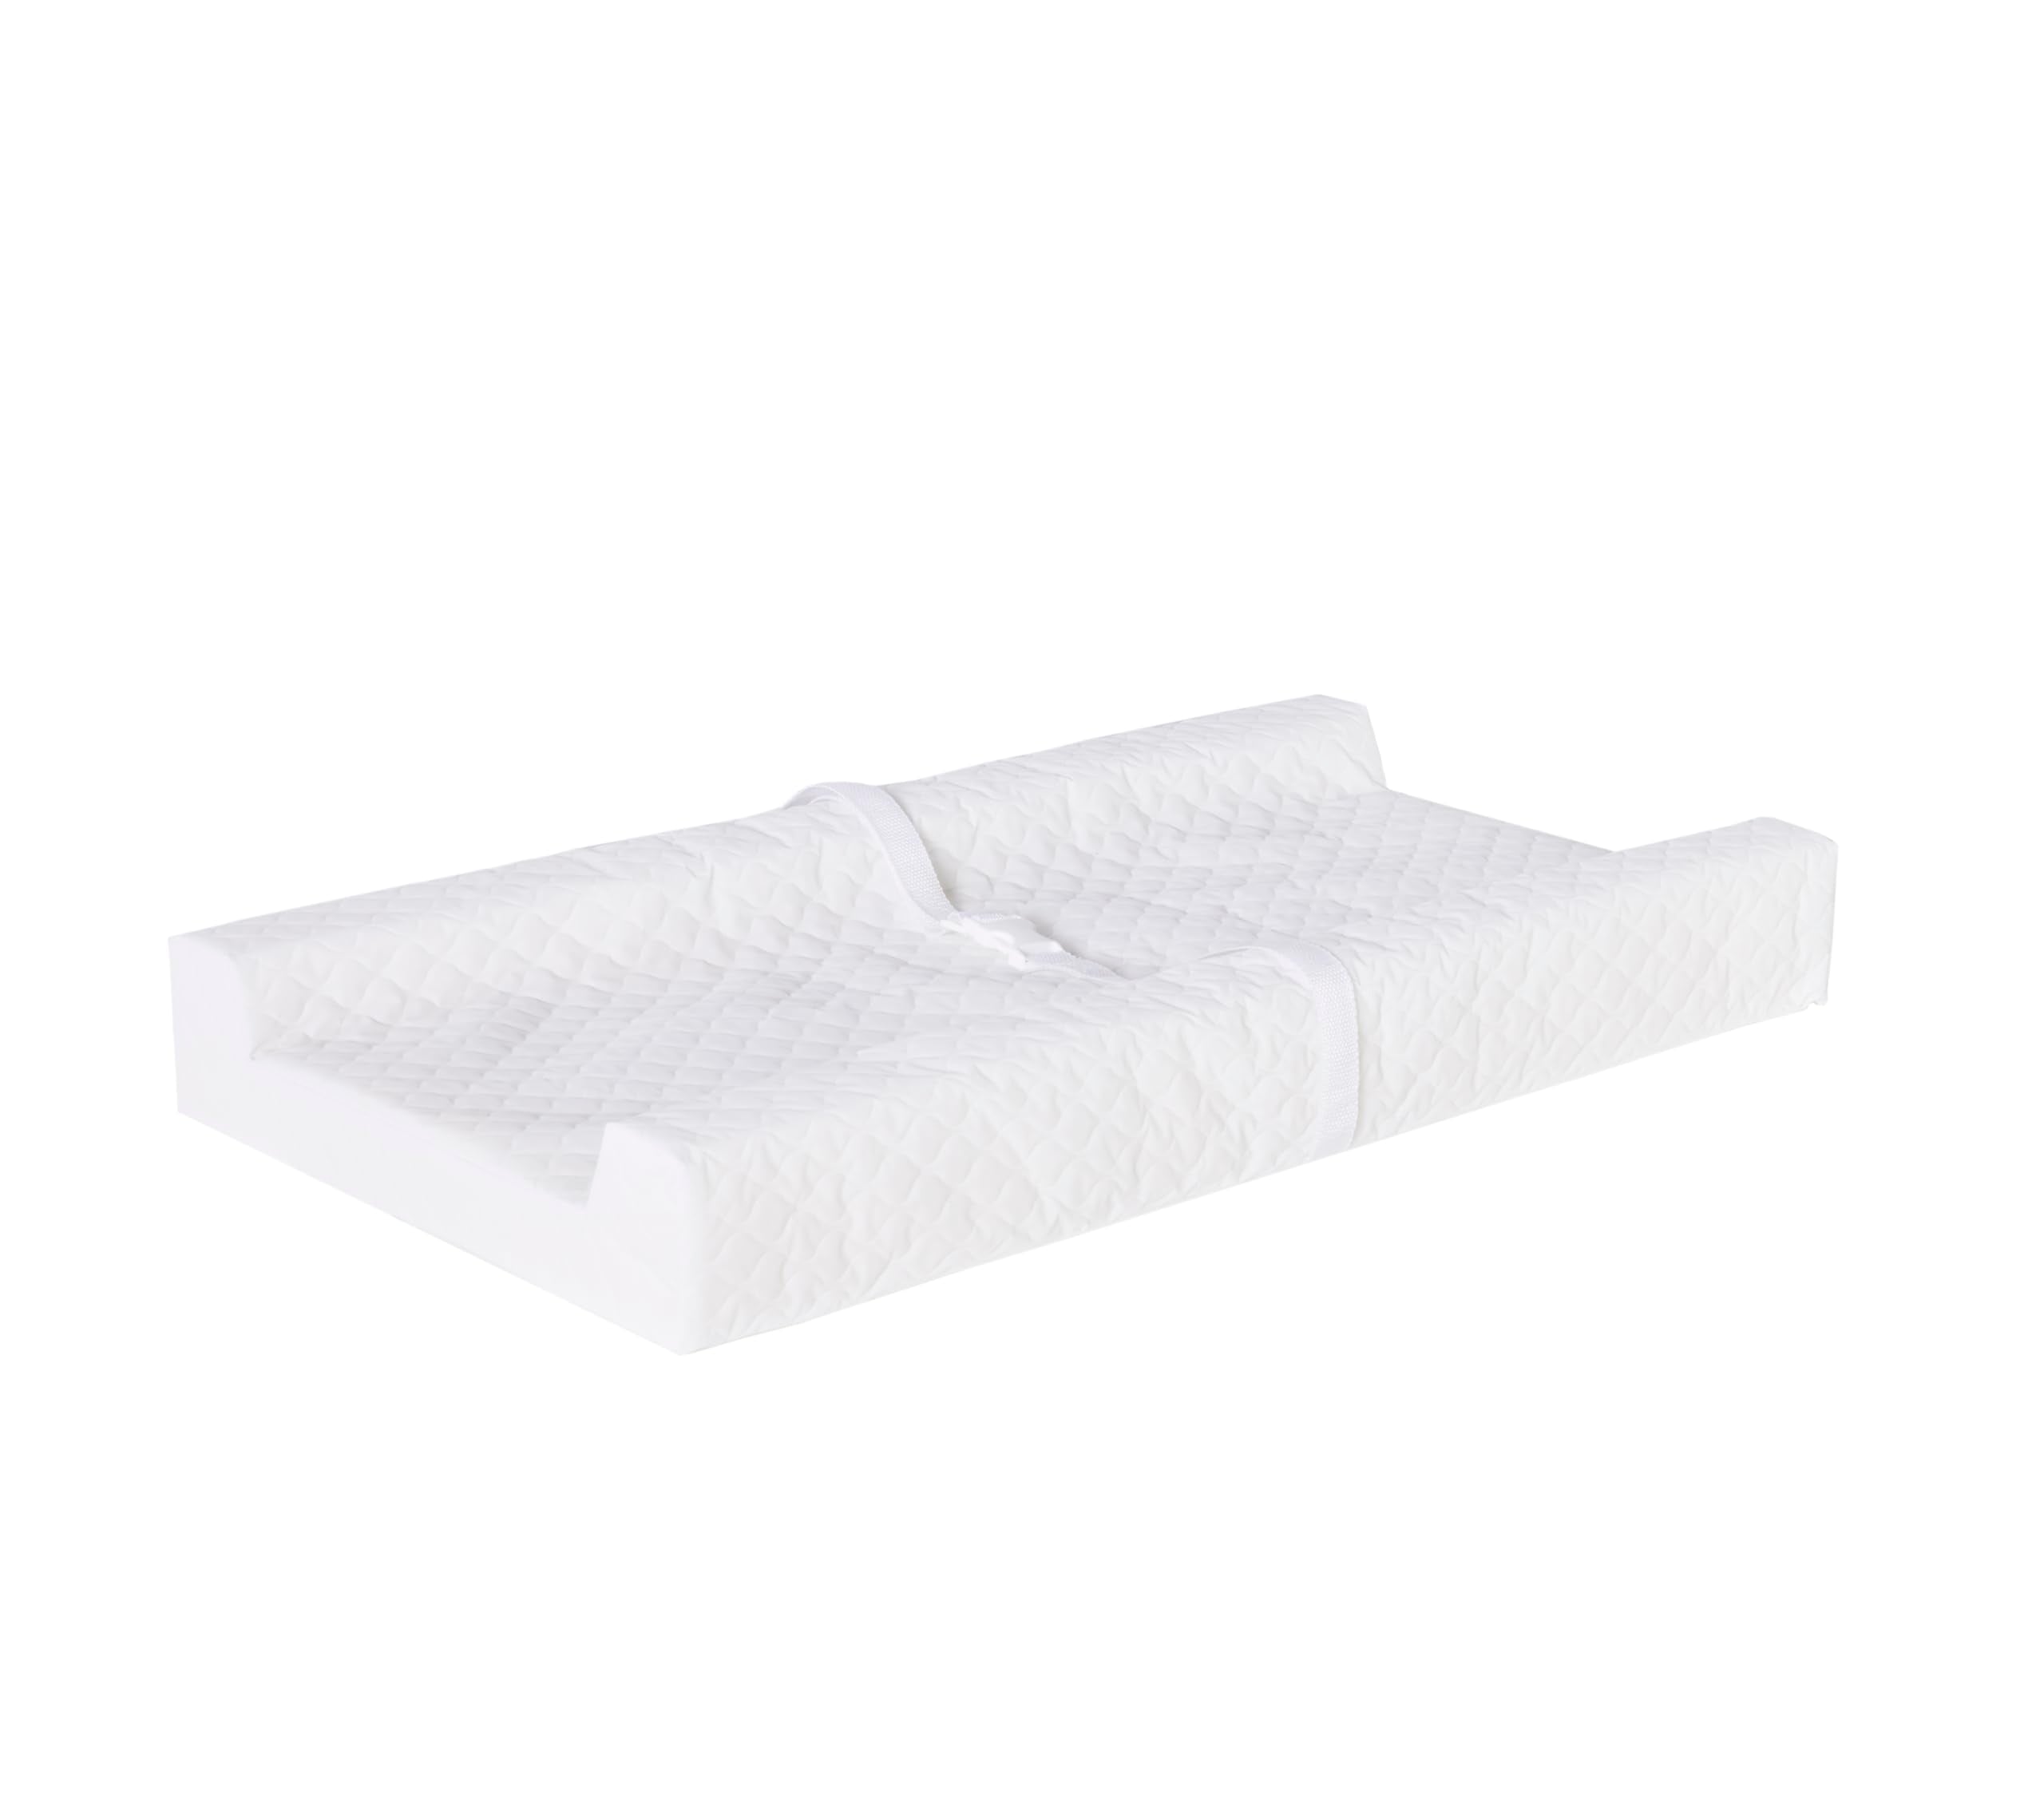 Infant Changing Pad